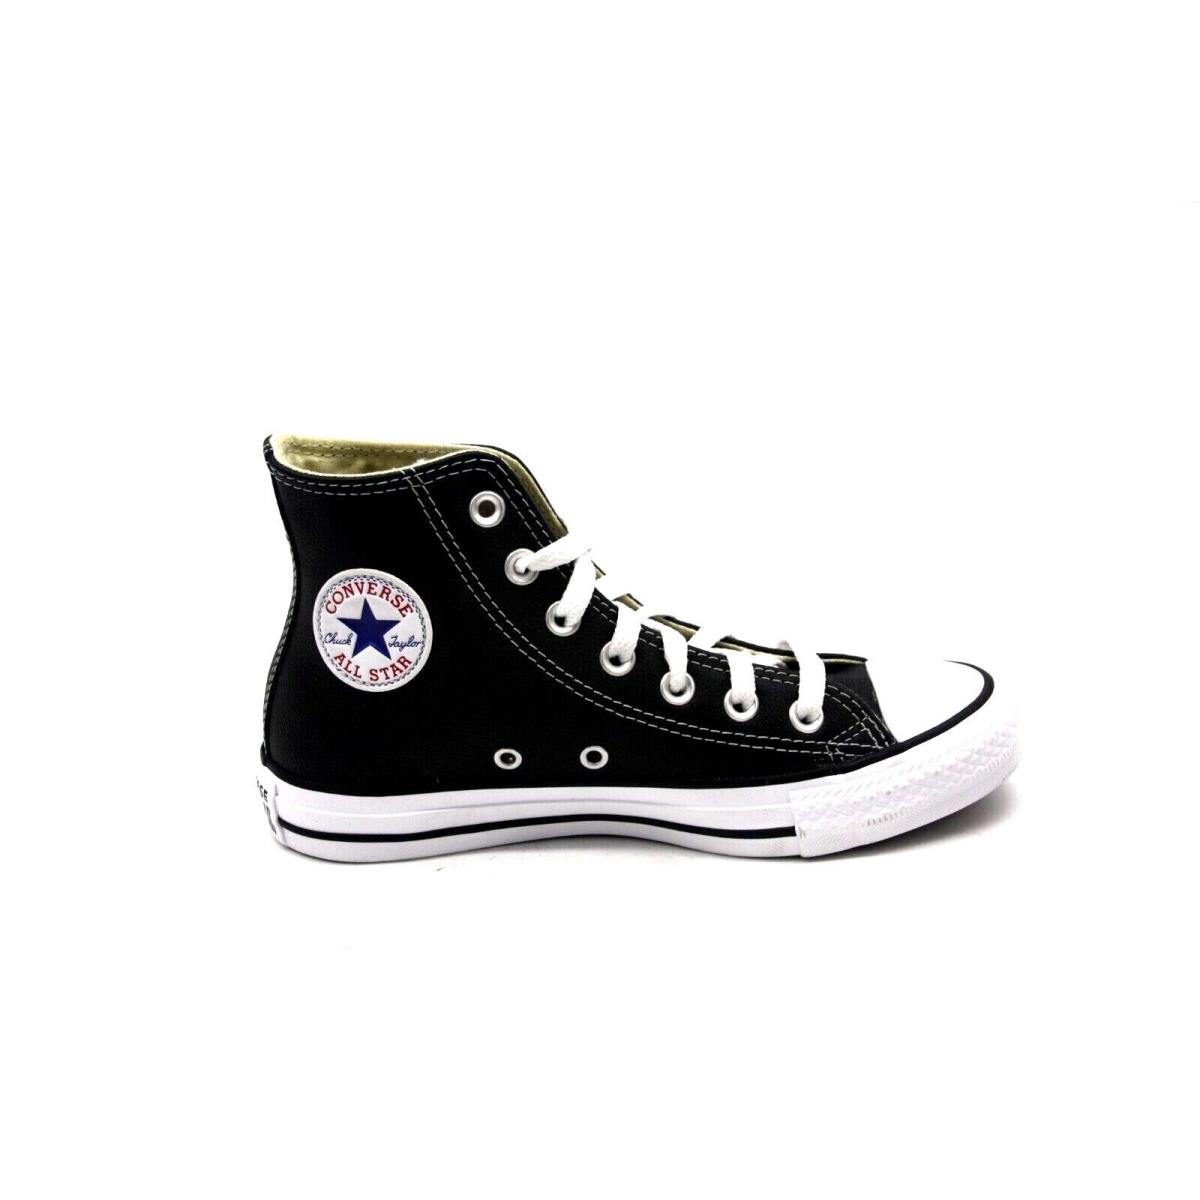 Converse Chuck Taylor All Star 132170C Shoes Leather HI Black/white Unisex